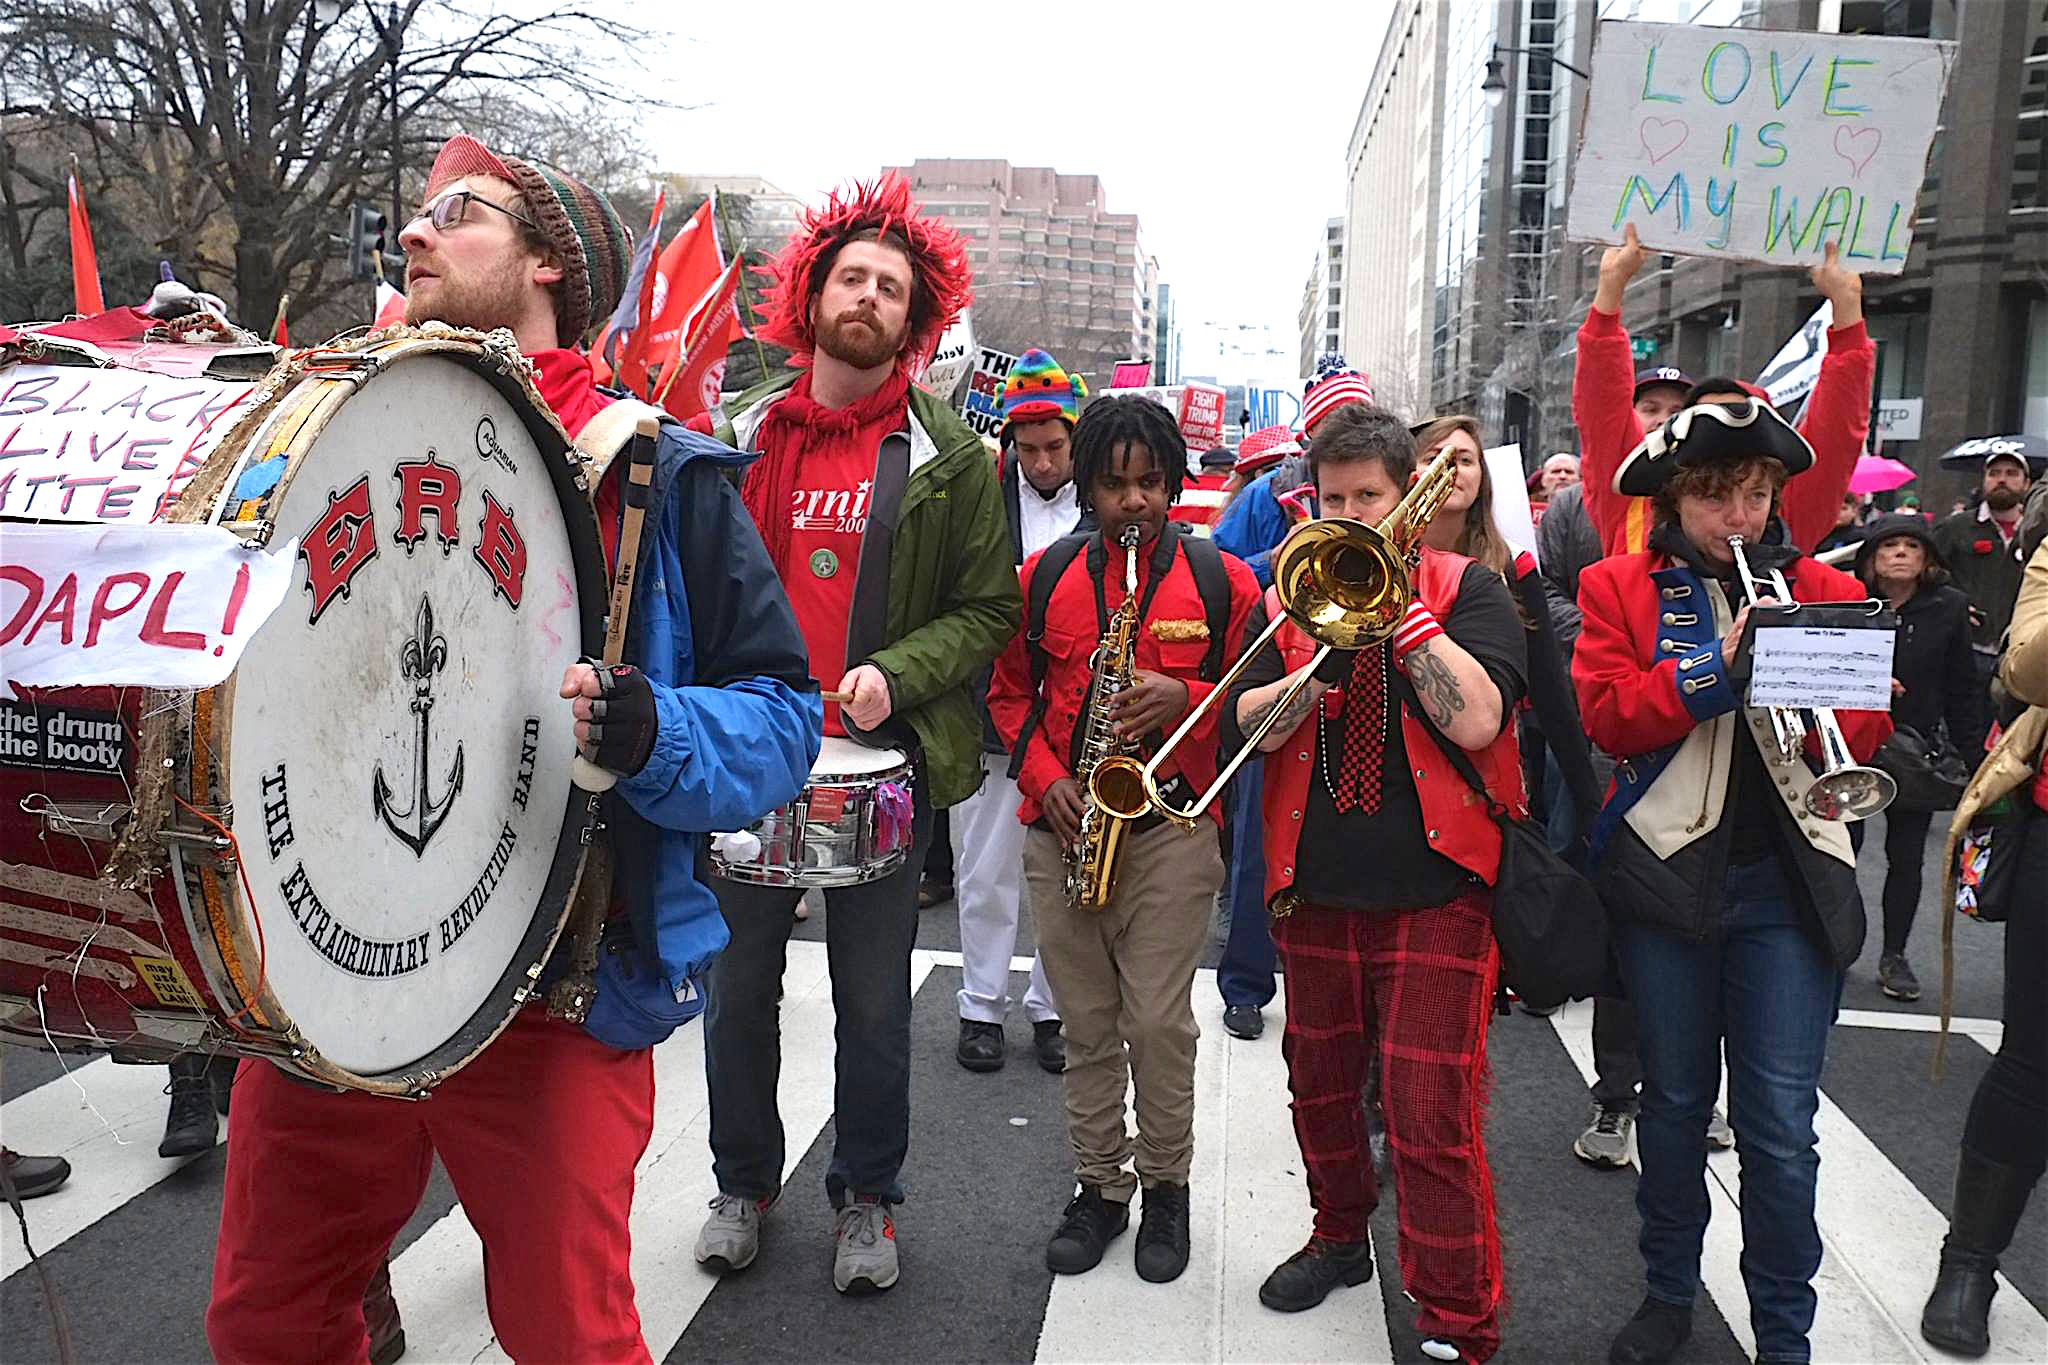 The Extraordinary Rendition Band helped keep the crowd on the movin' and groovin'.